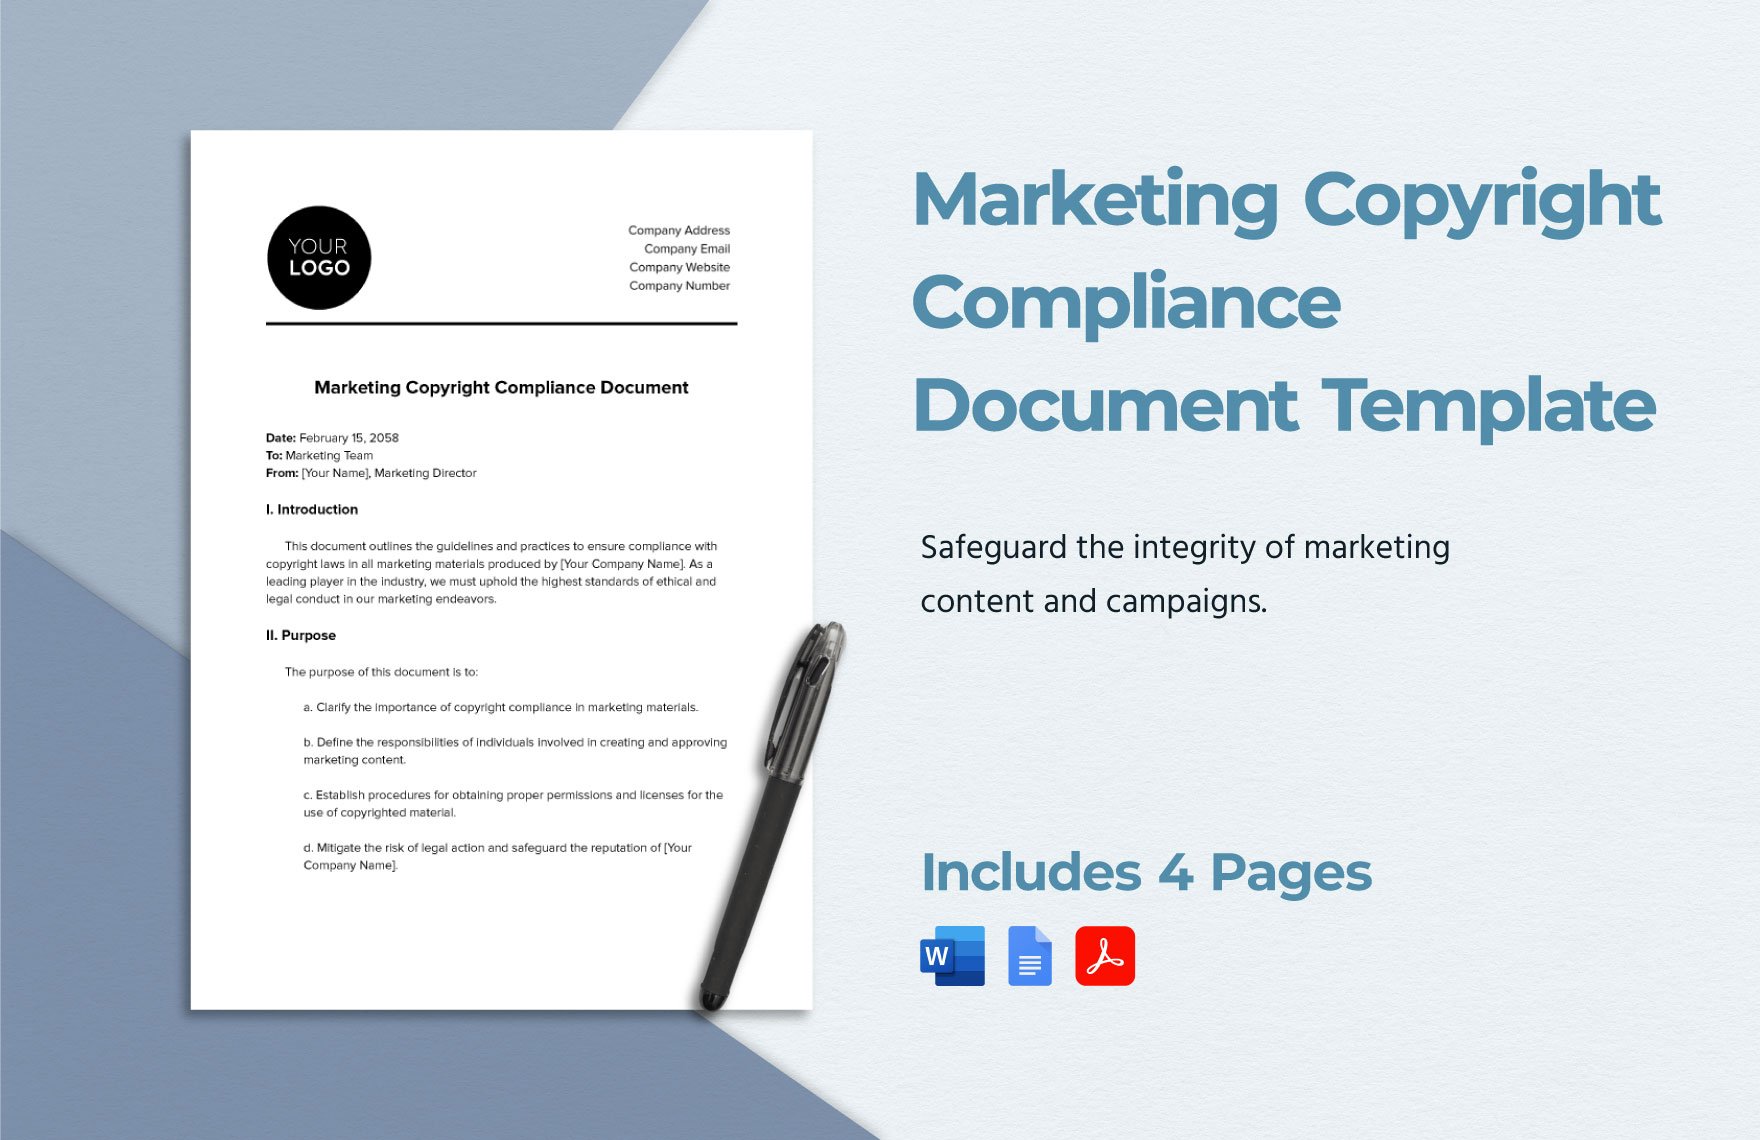 Marketing Copyright Compliance Document Template in Word, Google Docs, PDF